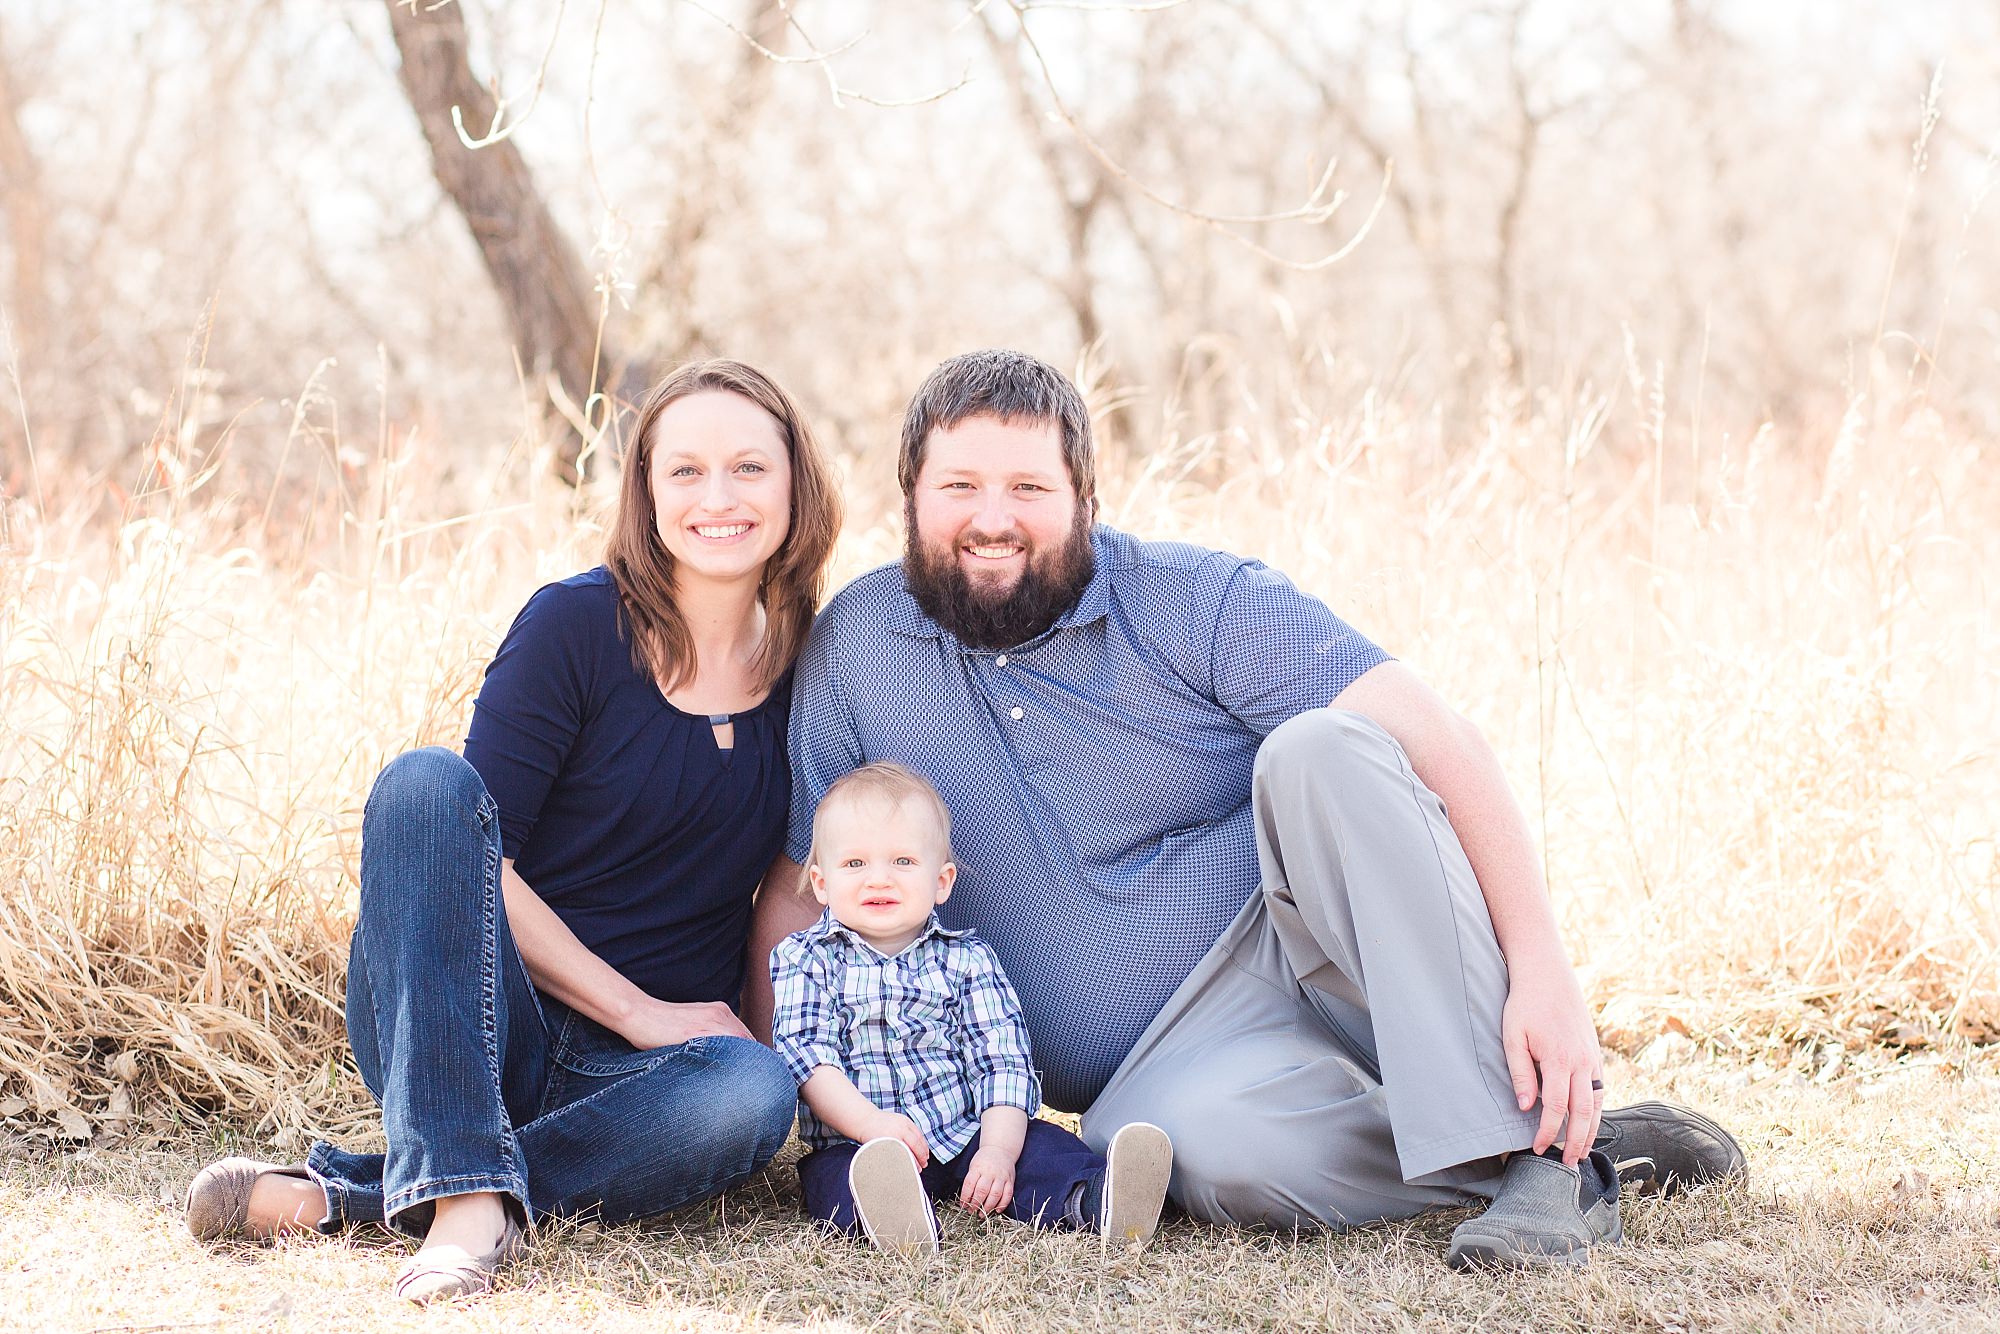 Family of three in shades of blue sit in tall grass with little boy celebrating his First Birthday